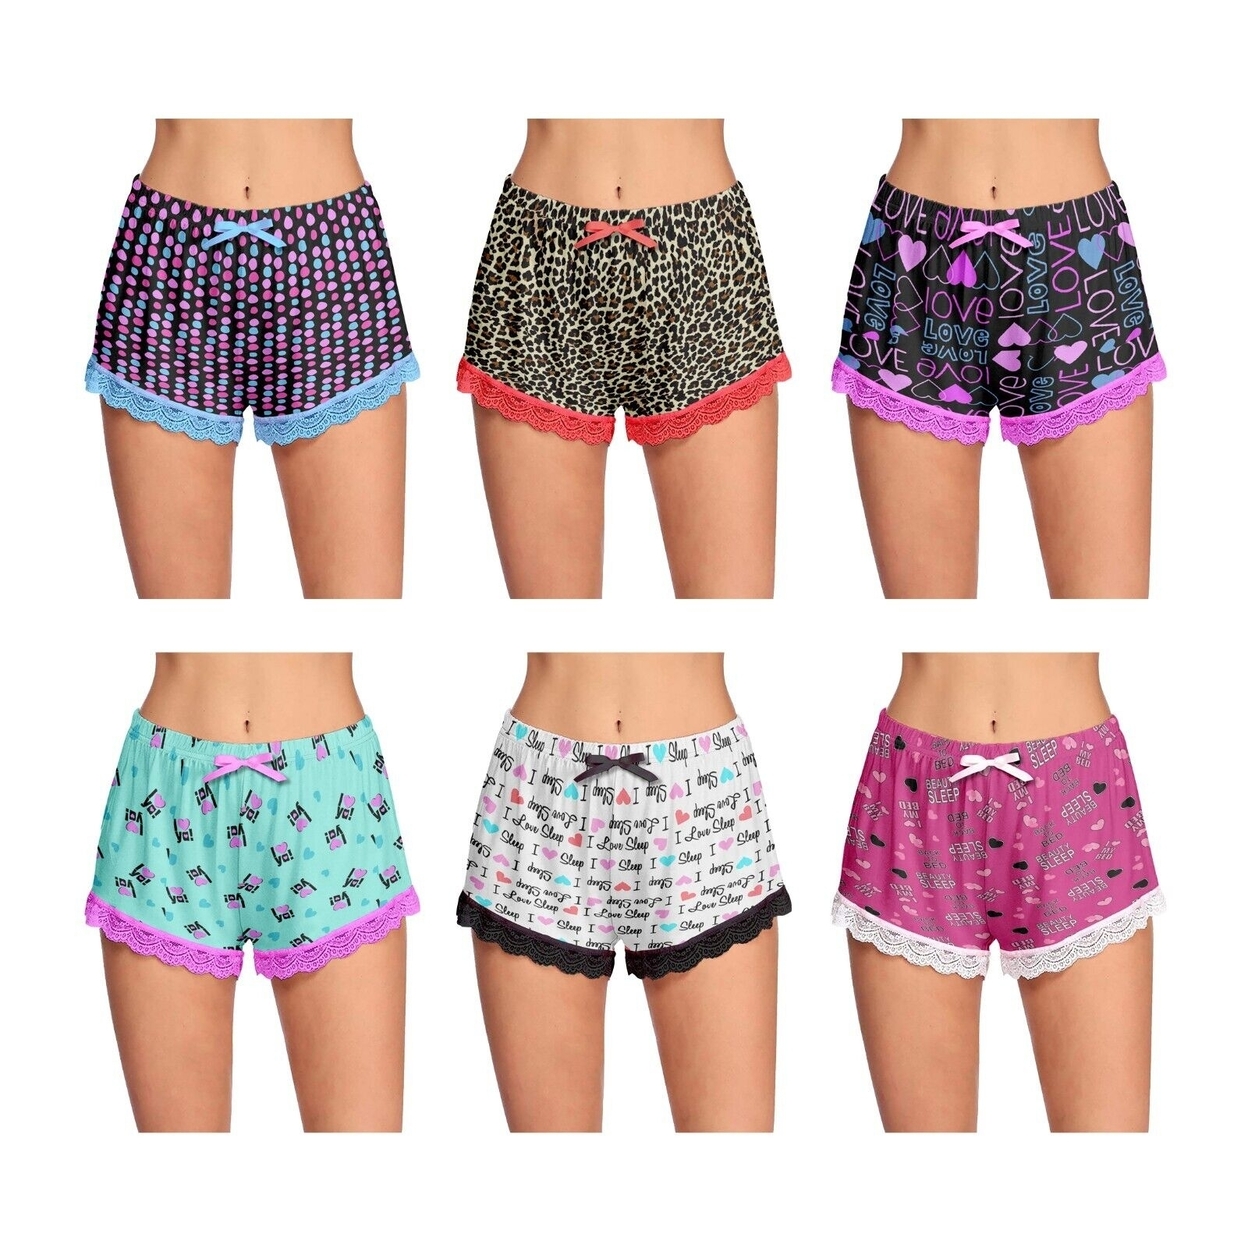 5-Pack: Women's Ultra-Soft Cozy Fun Printed Lace Trim Pajama Lounge Shorts - Large, Shapes